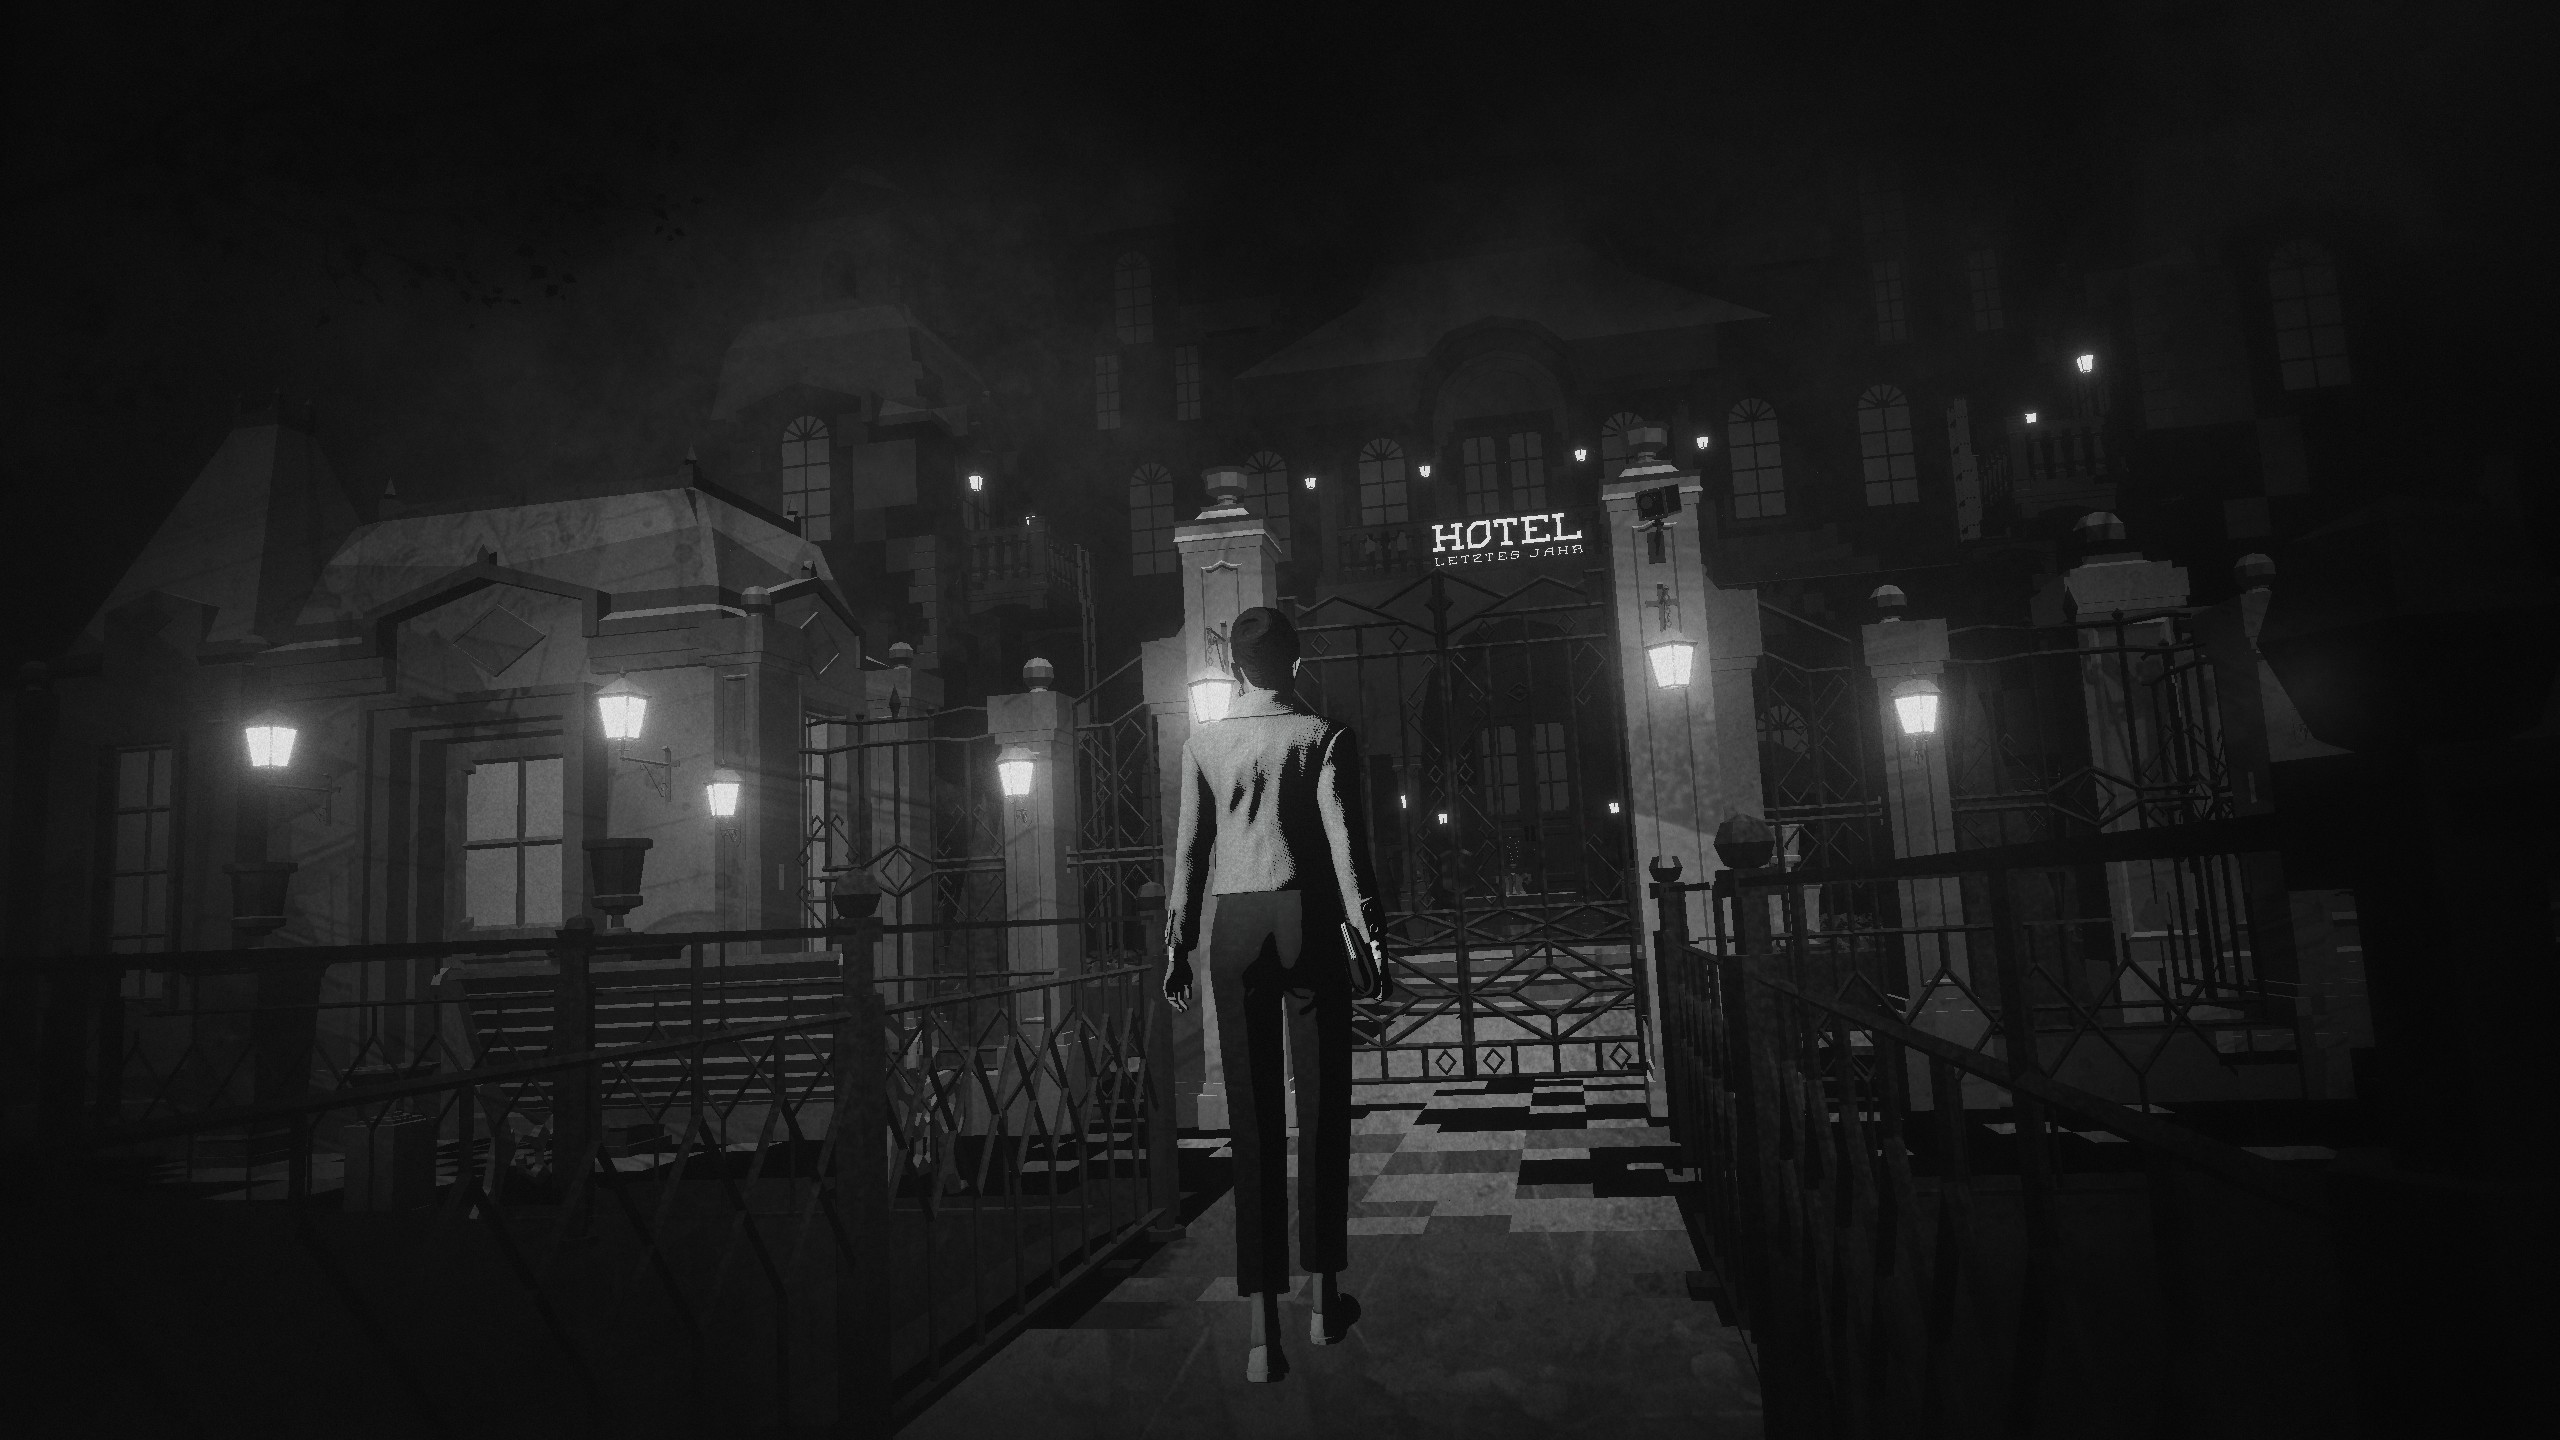 A woman approaches a foreboding hotel